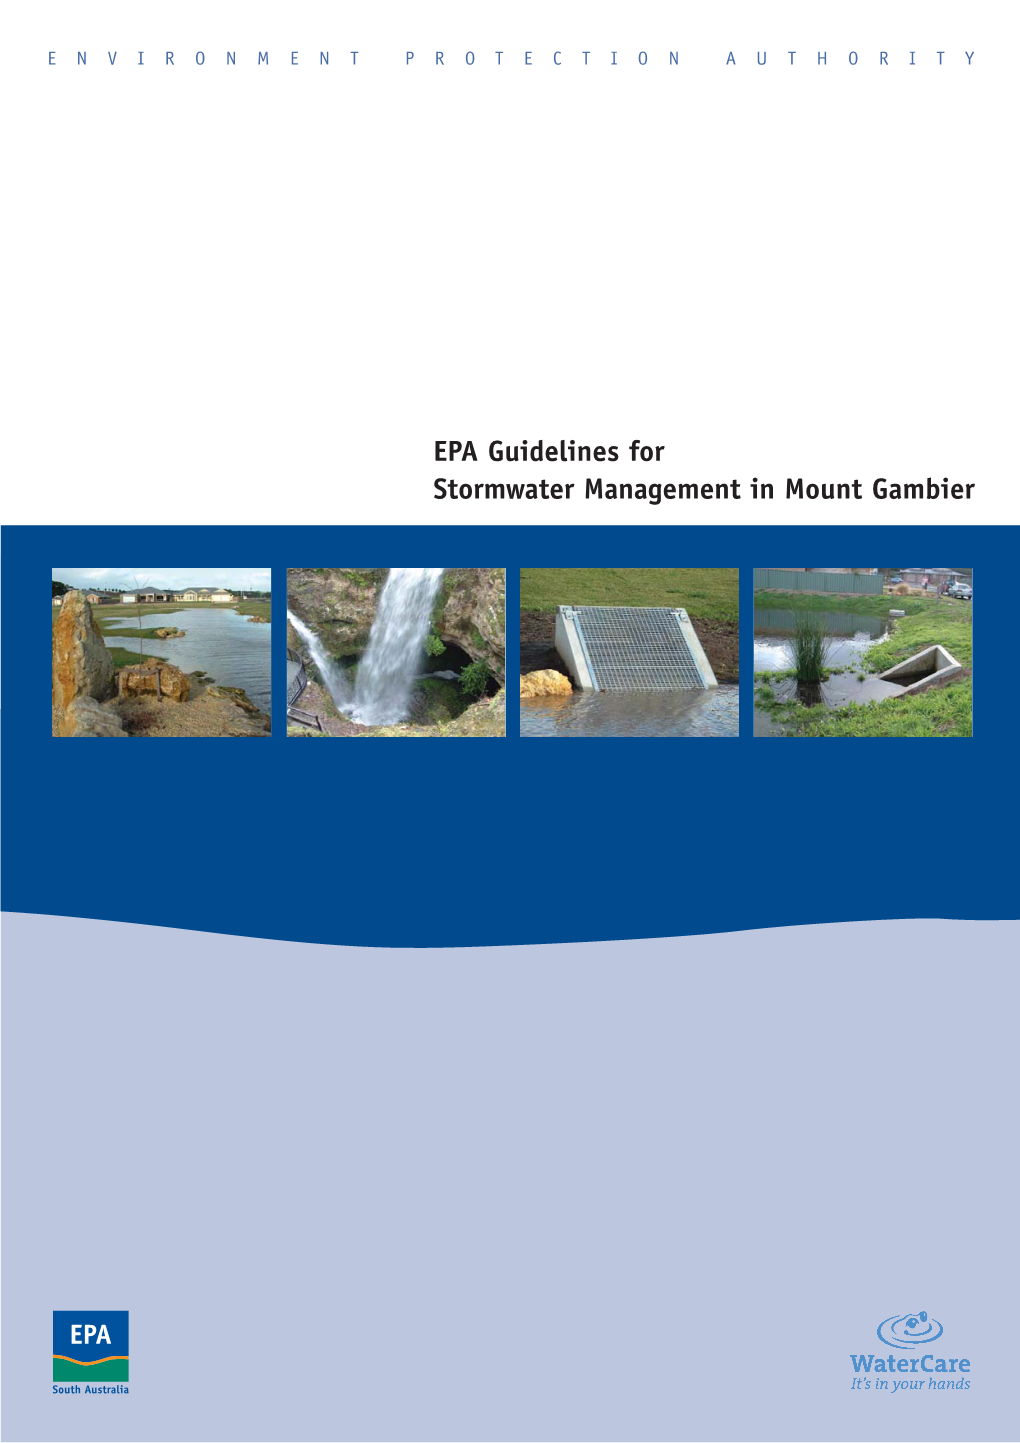 EPA Guidelines for Stormwater Management in Mount Gambier